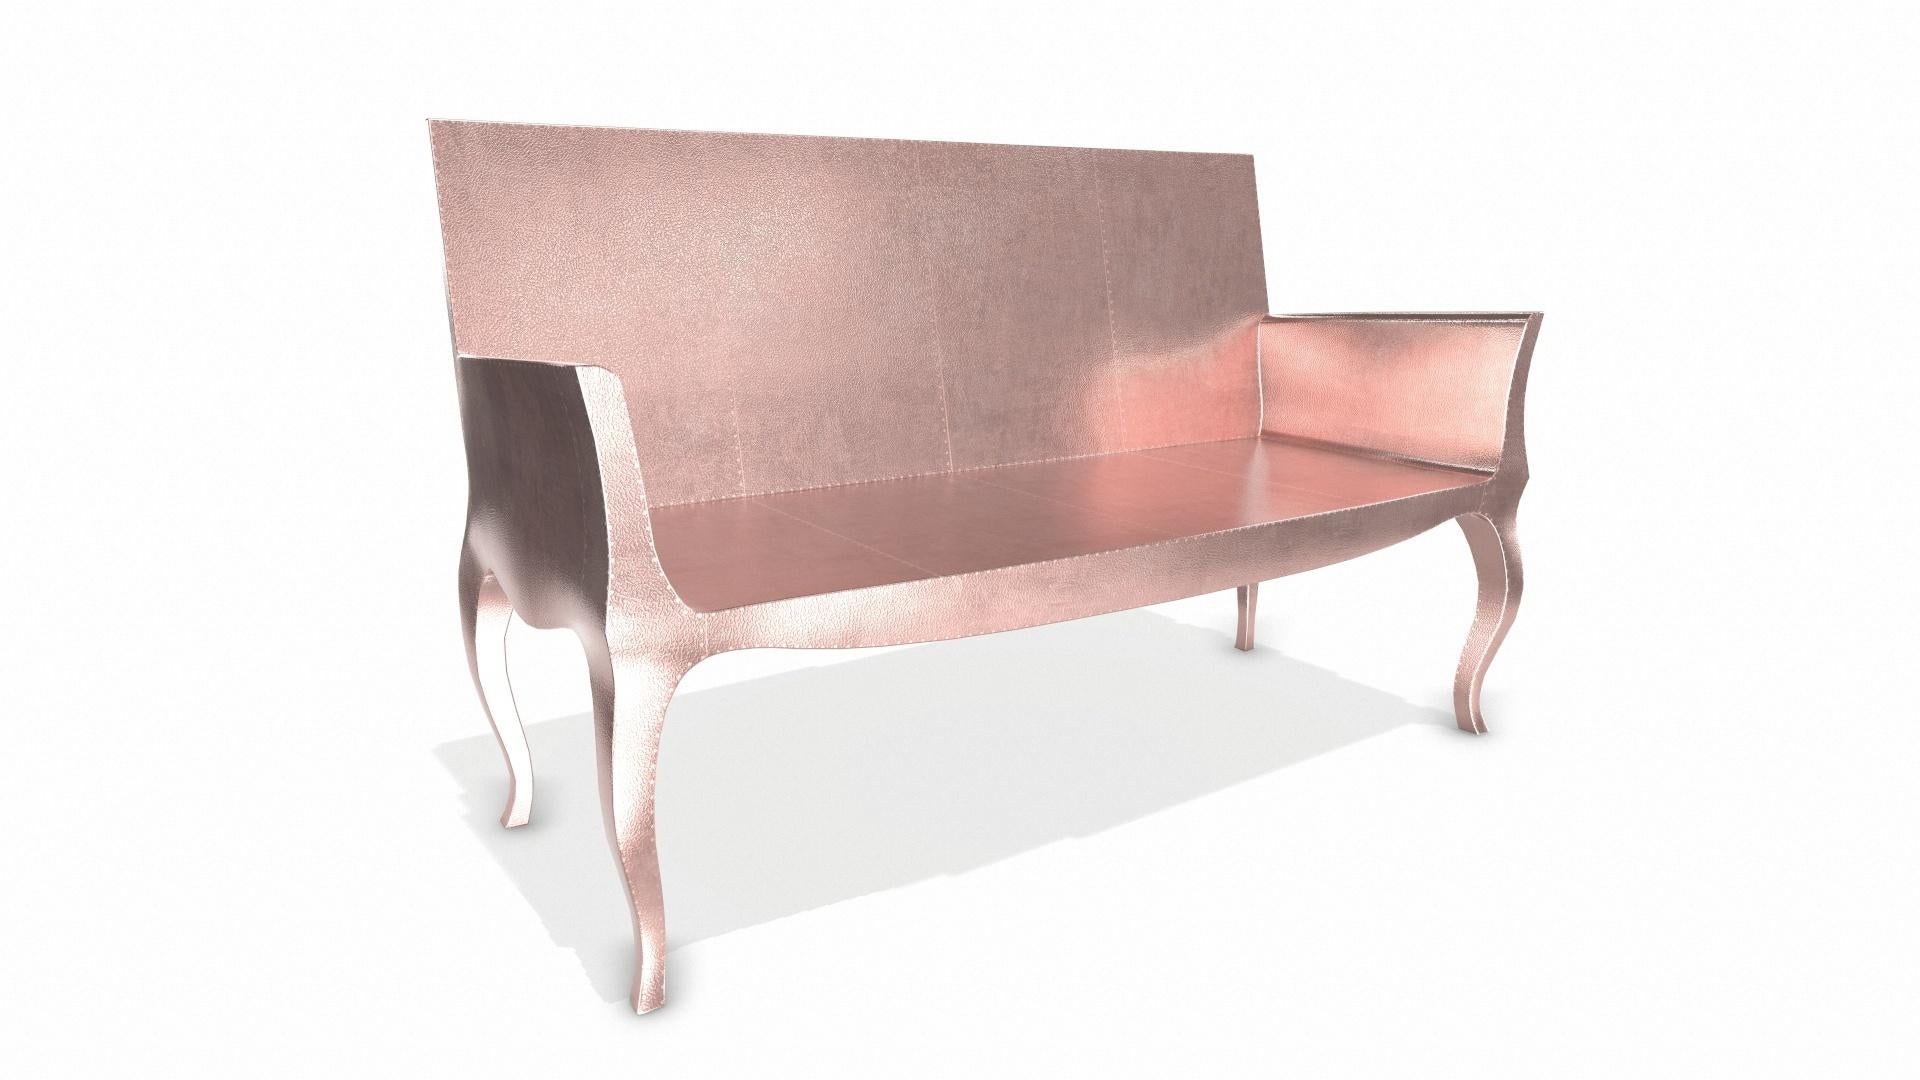 Contemporary Louise Settee Art Deco Canapes in Fine Hammered Copper by Paul Mathieu For Sale